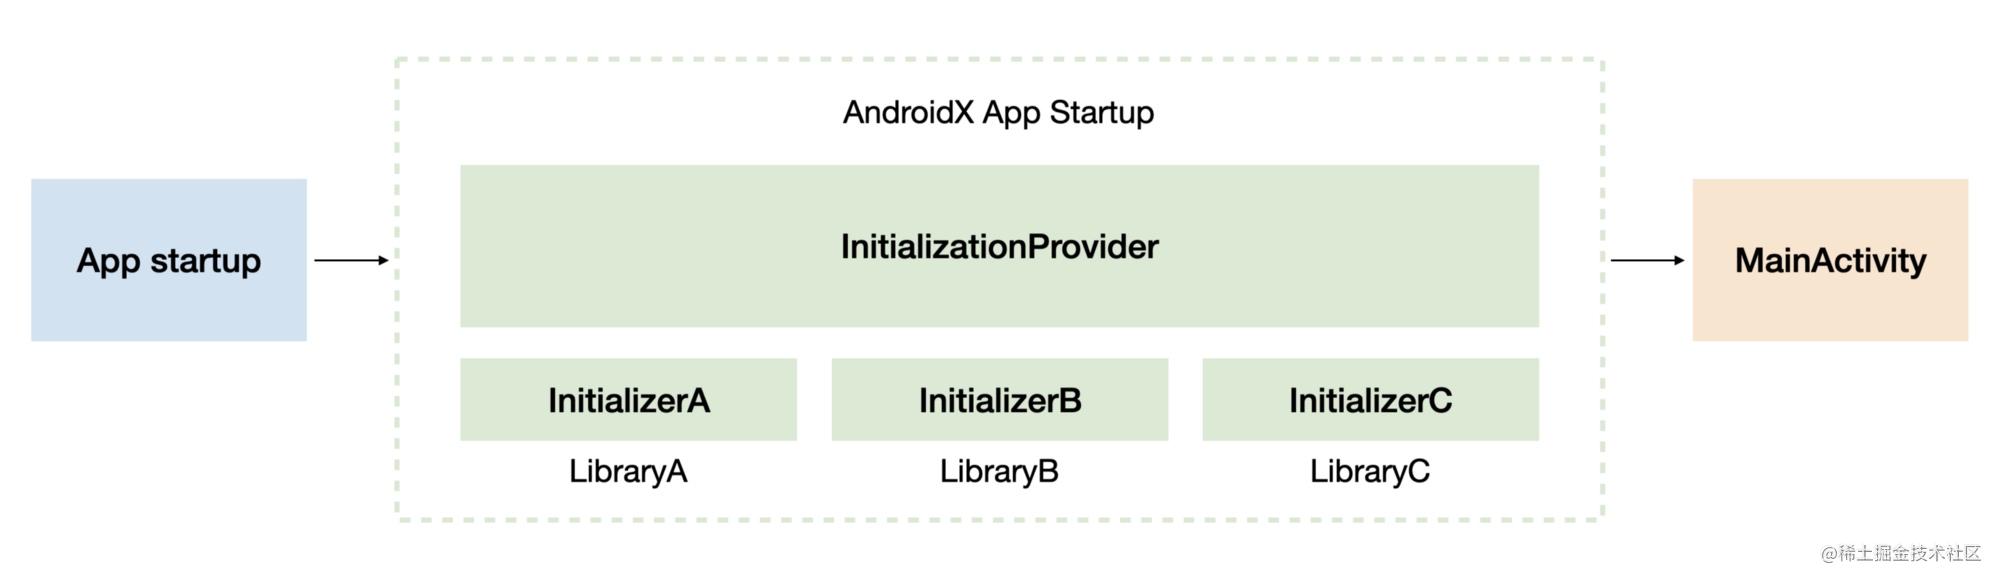 LibraryA, LibraryB, and LibraryC initialized by AndroidX Startup